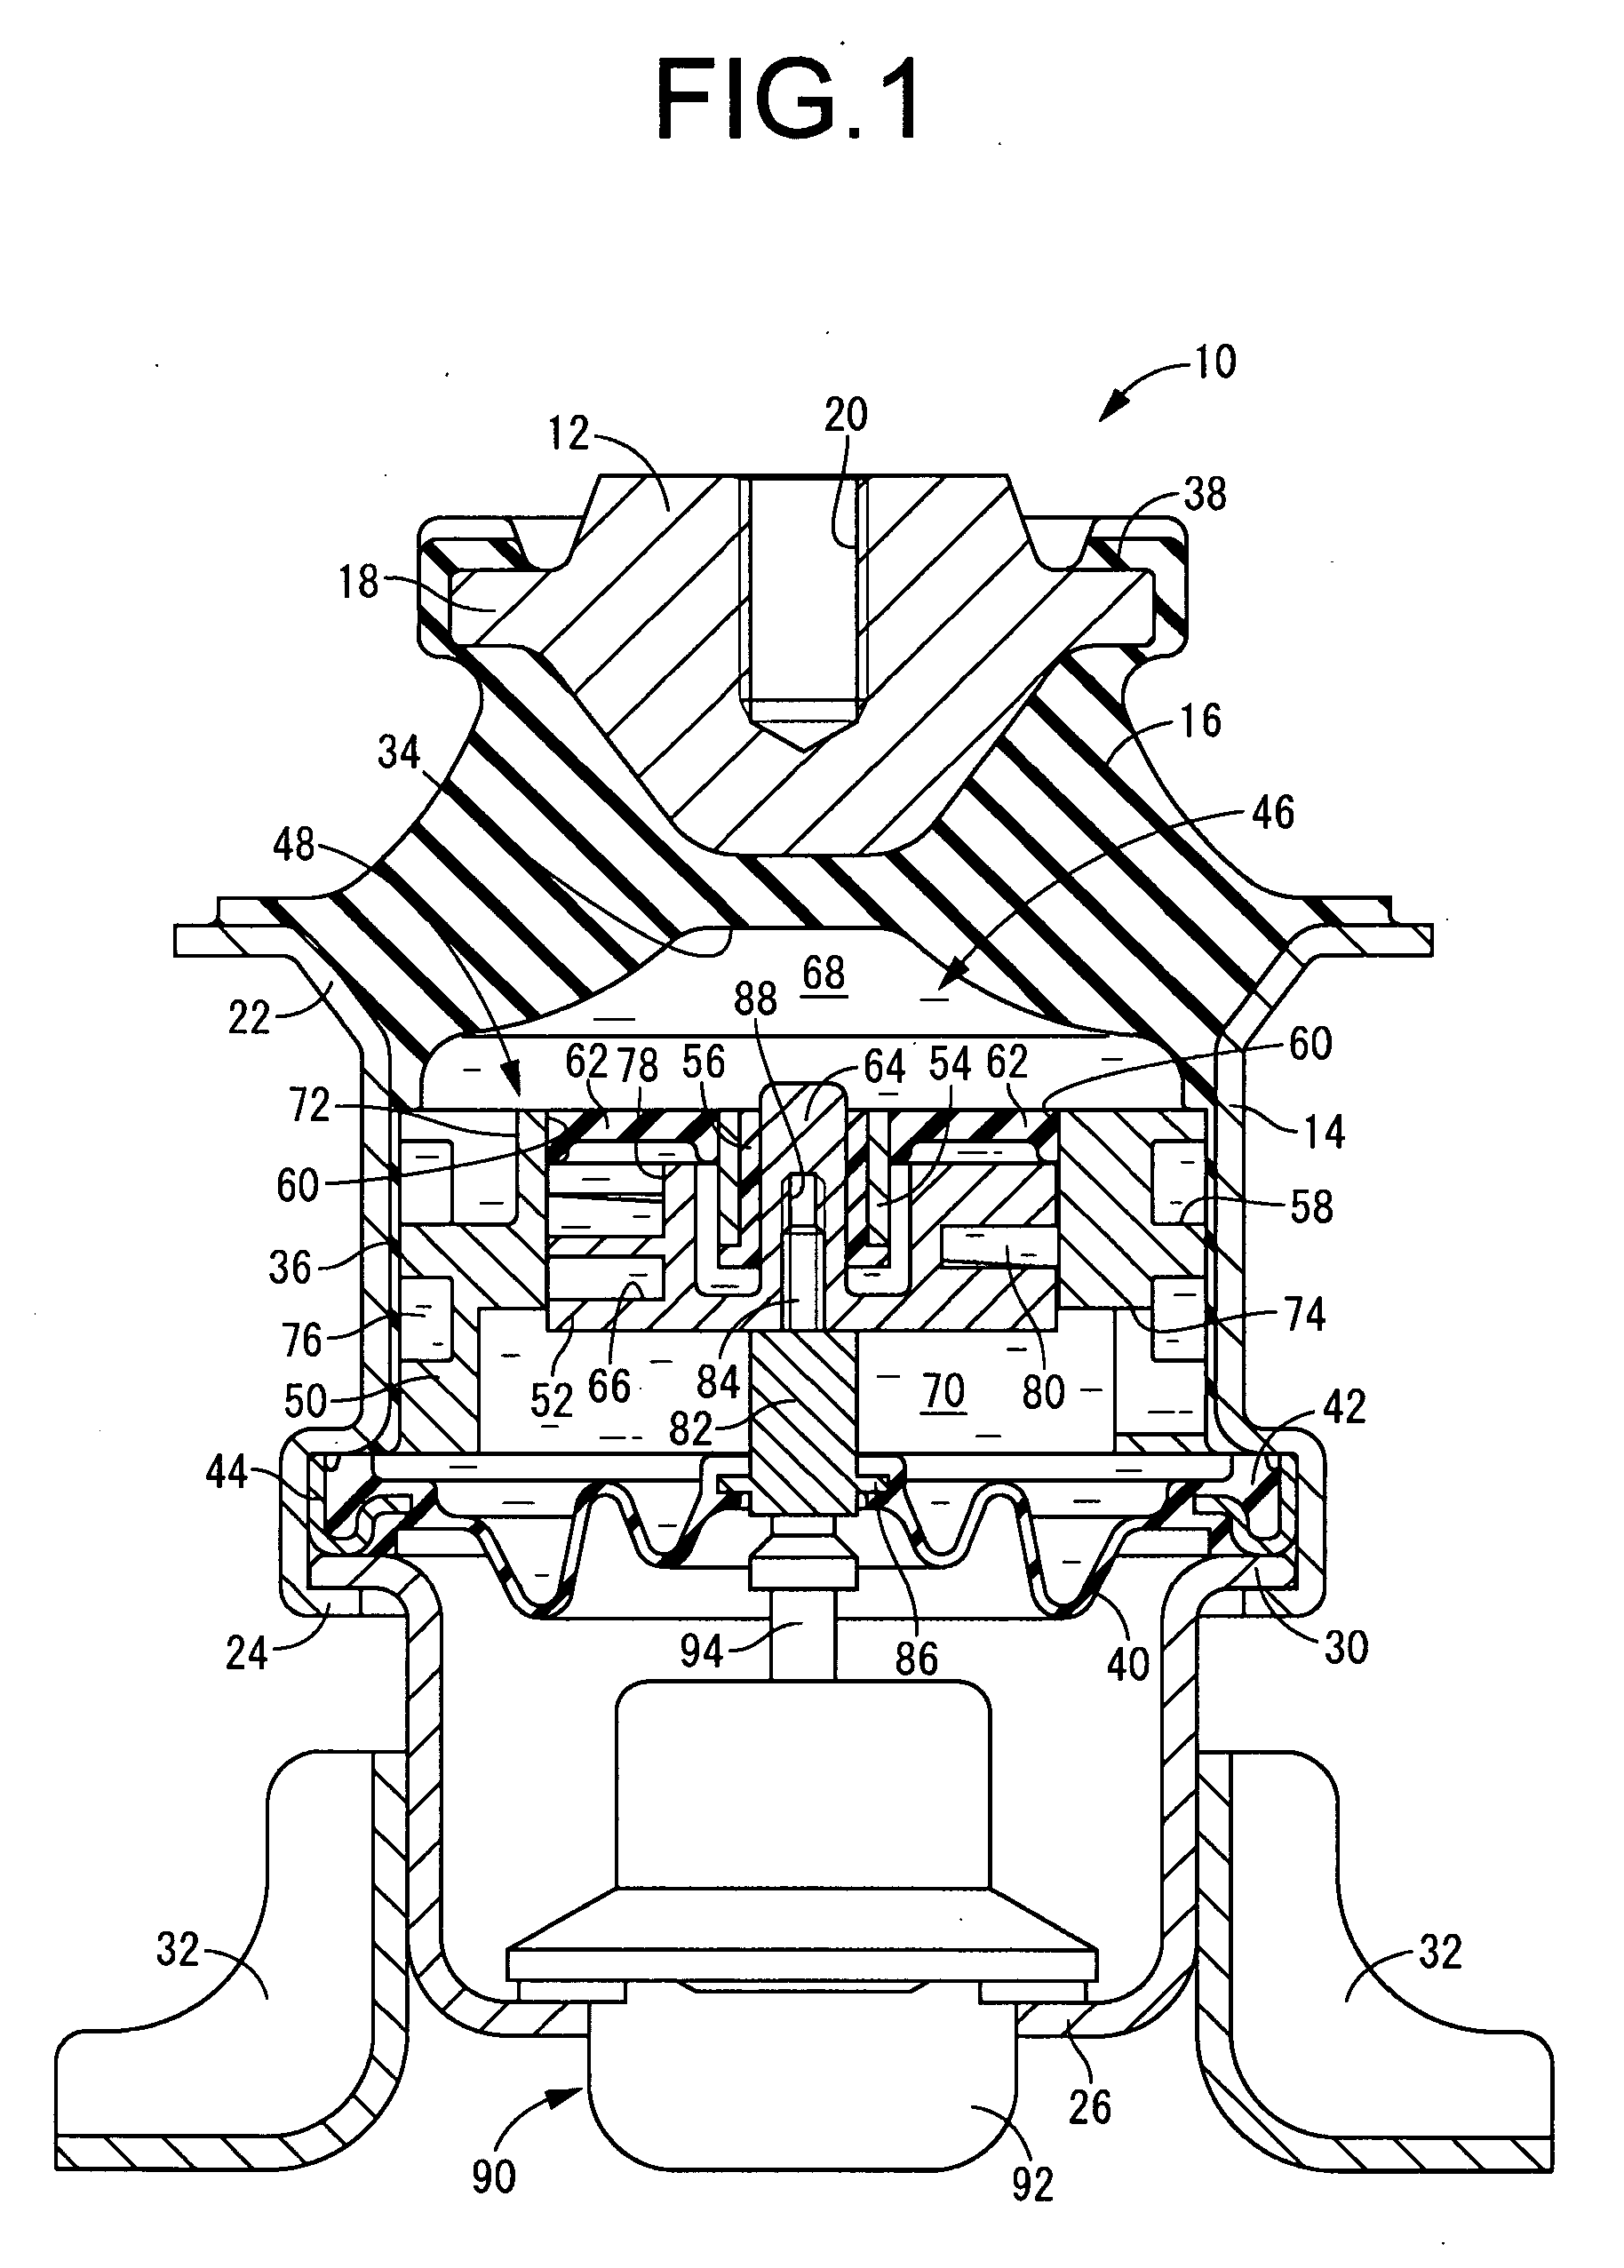 Fluid-filled vibration damping device and control method of the device used as engine mount